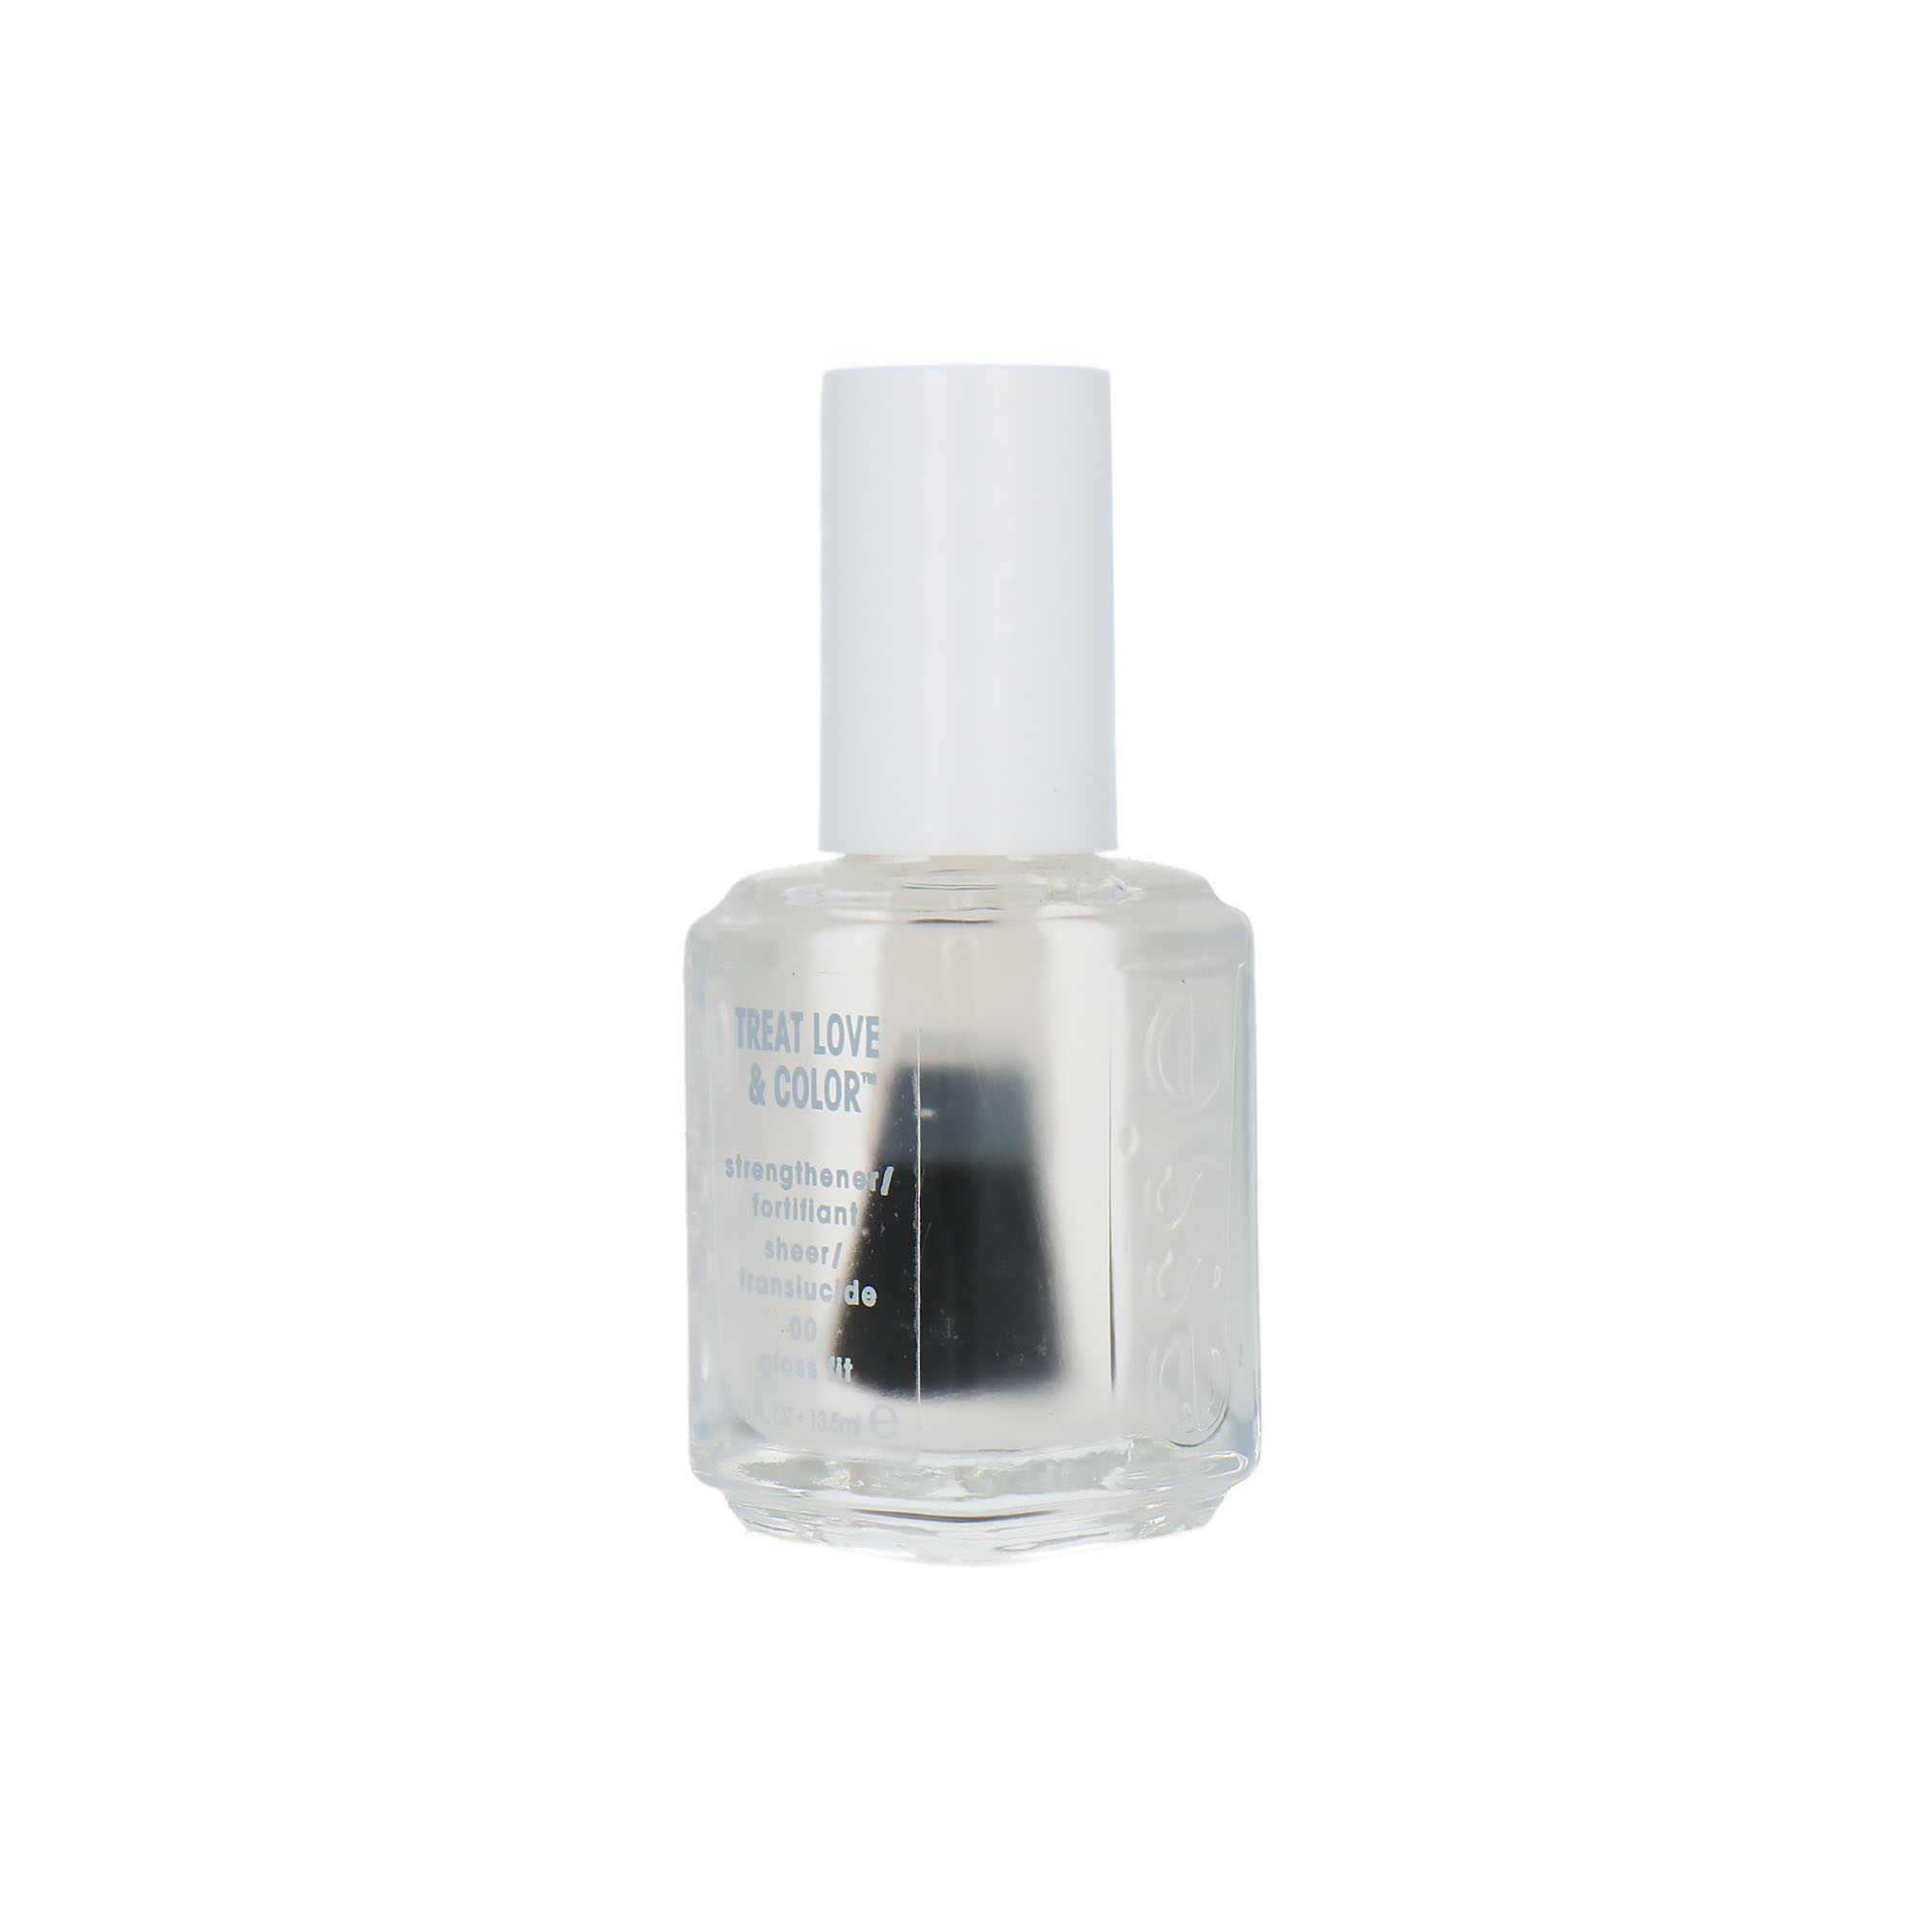 Essie Treat Love & Nagellack - Fit Strengthener 00 - Kaufen Color Blisso Gloss